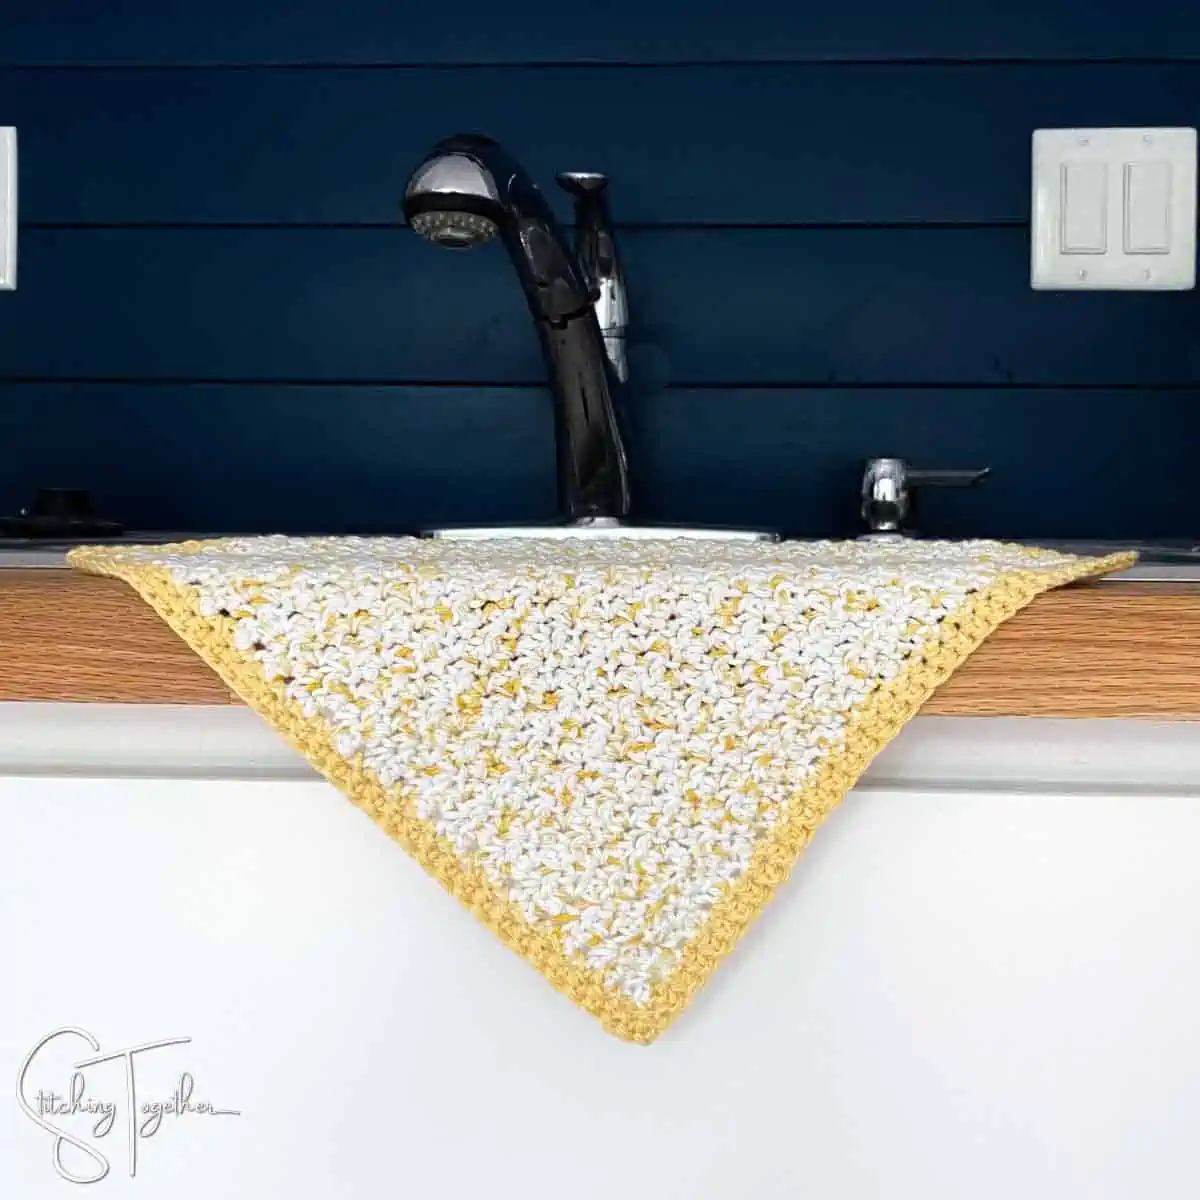 yellow and white crochet dishcloth draped on the edge of a sink